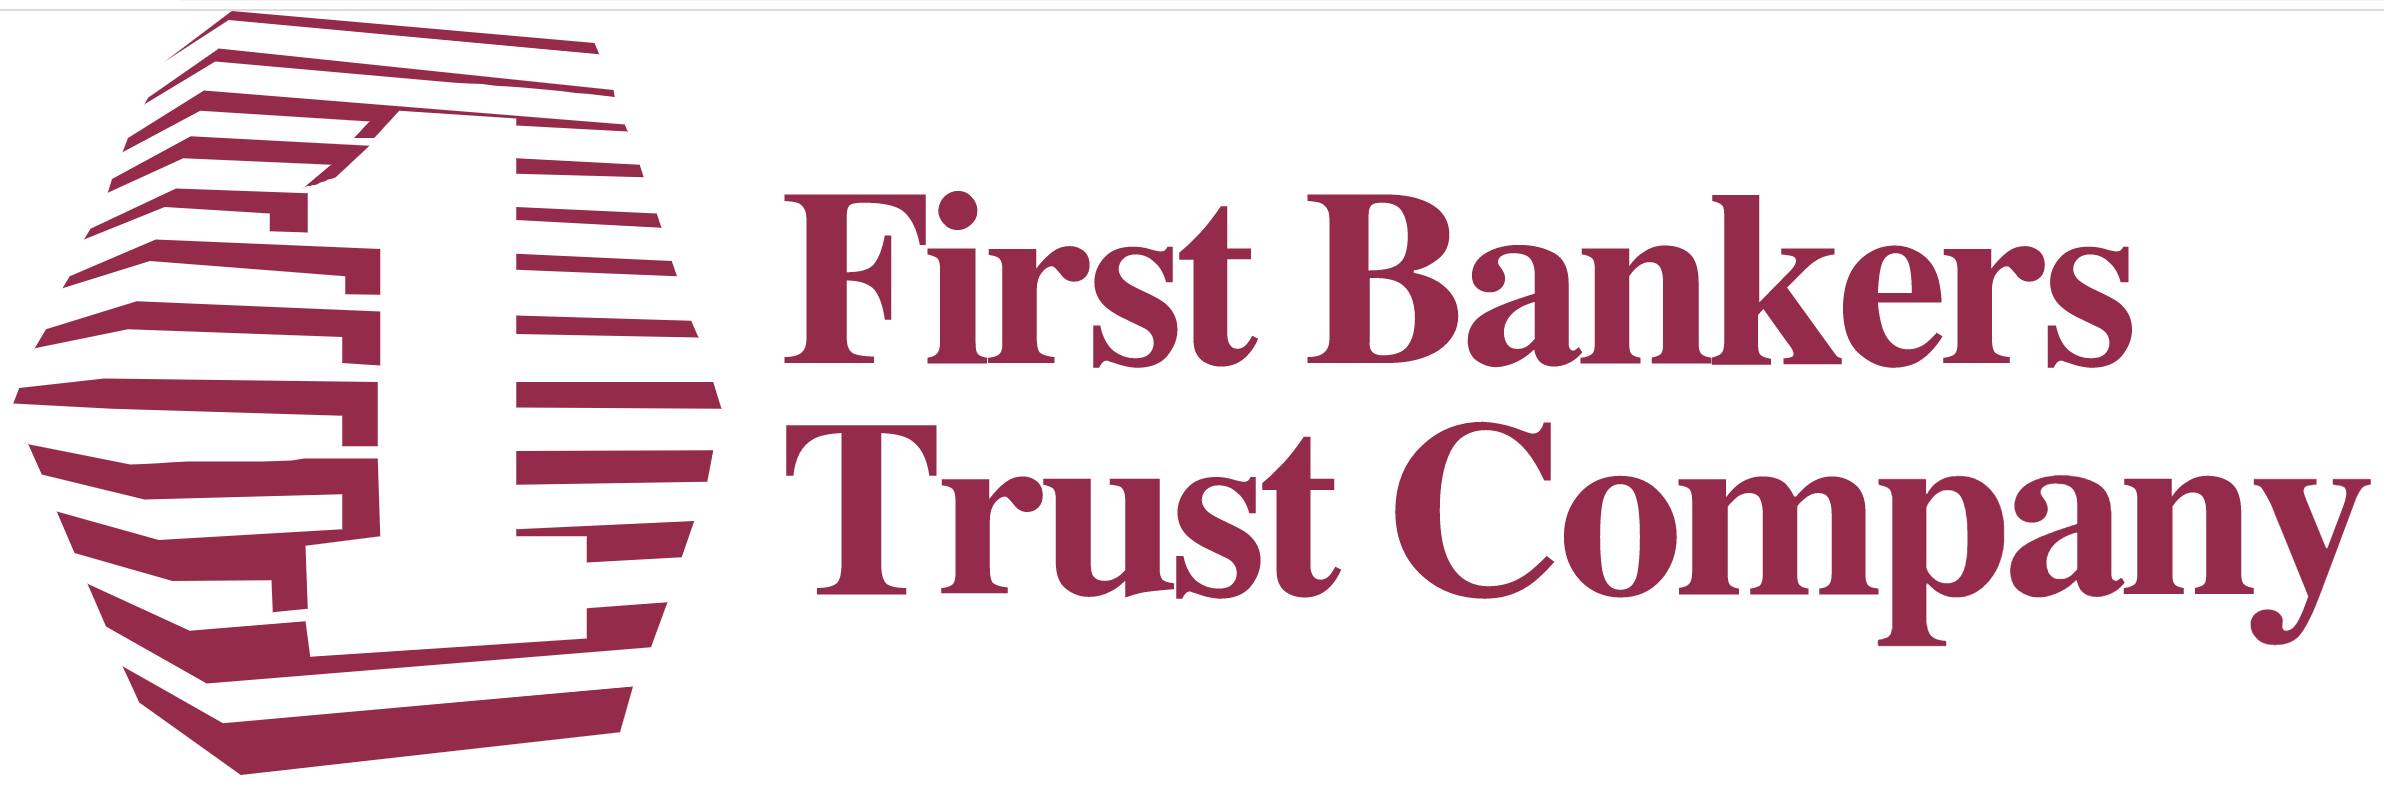 First Bankers Trust Company logo